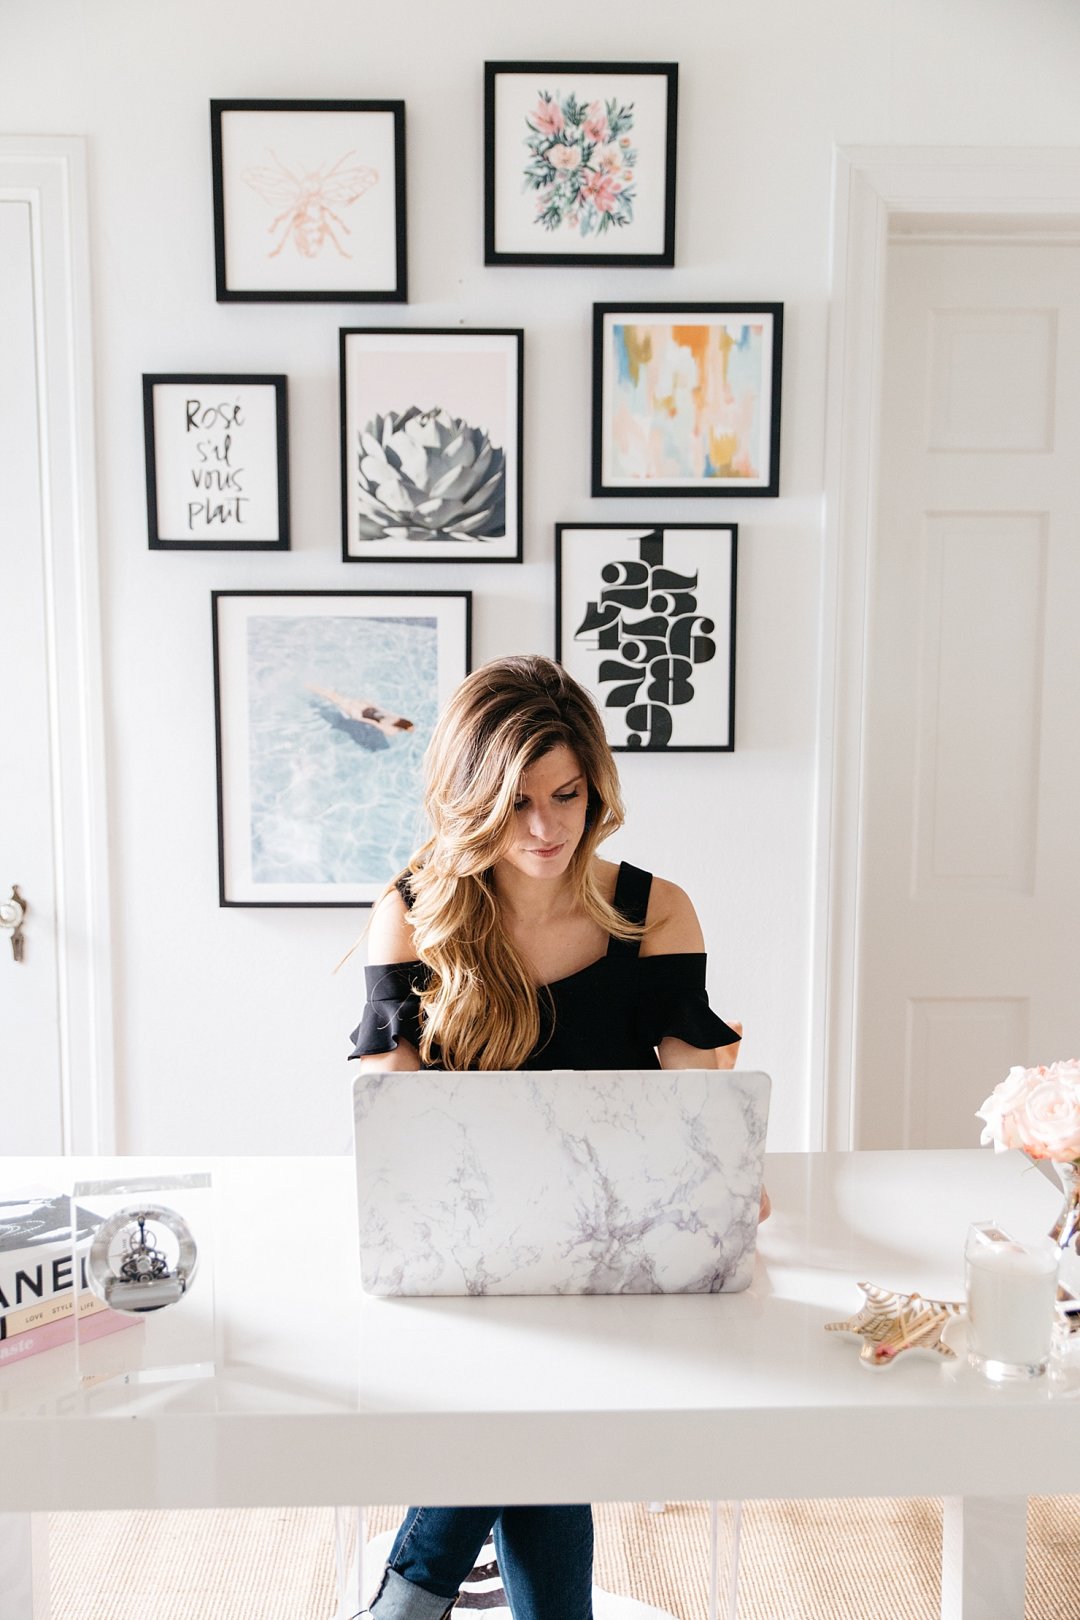 brightontheday home office reveal, minted gallery wall, white lacquer parsons desk, brighton keller office, chic bright and white office, how to organize your life, organization tips and habits to being more productive